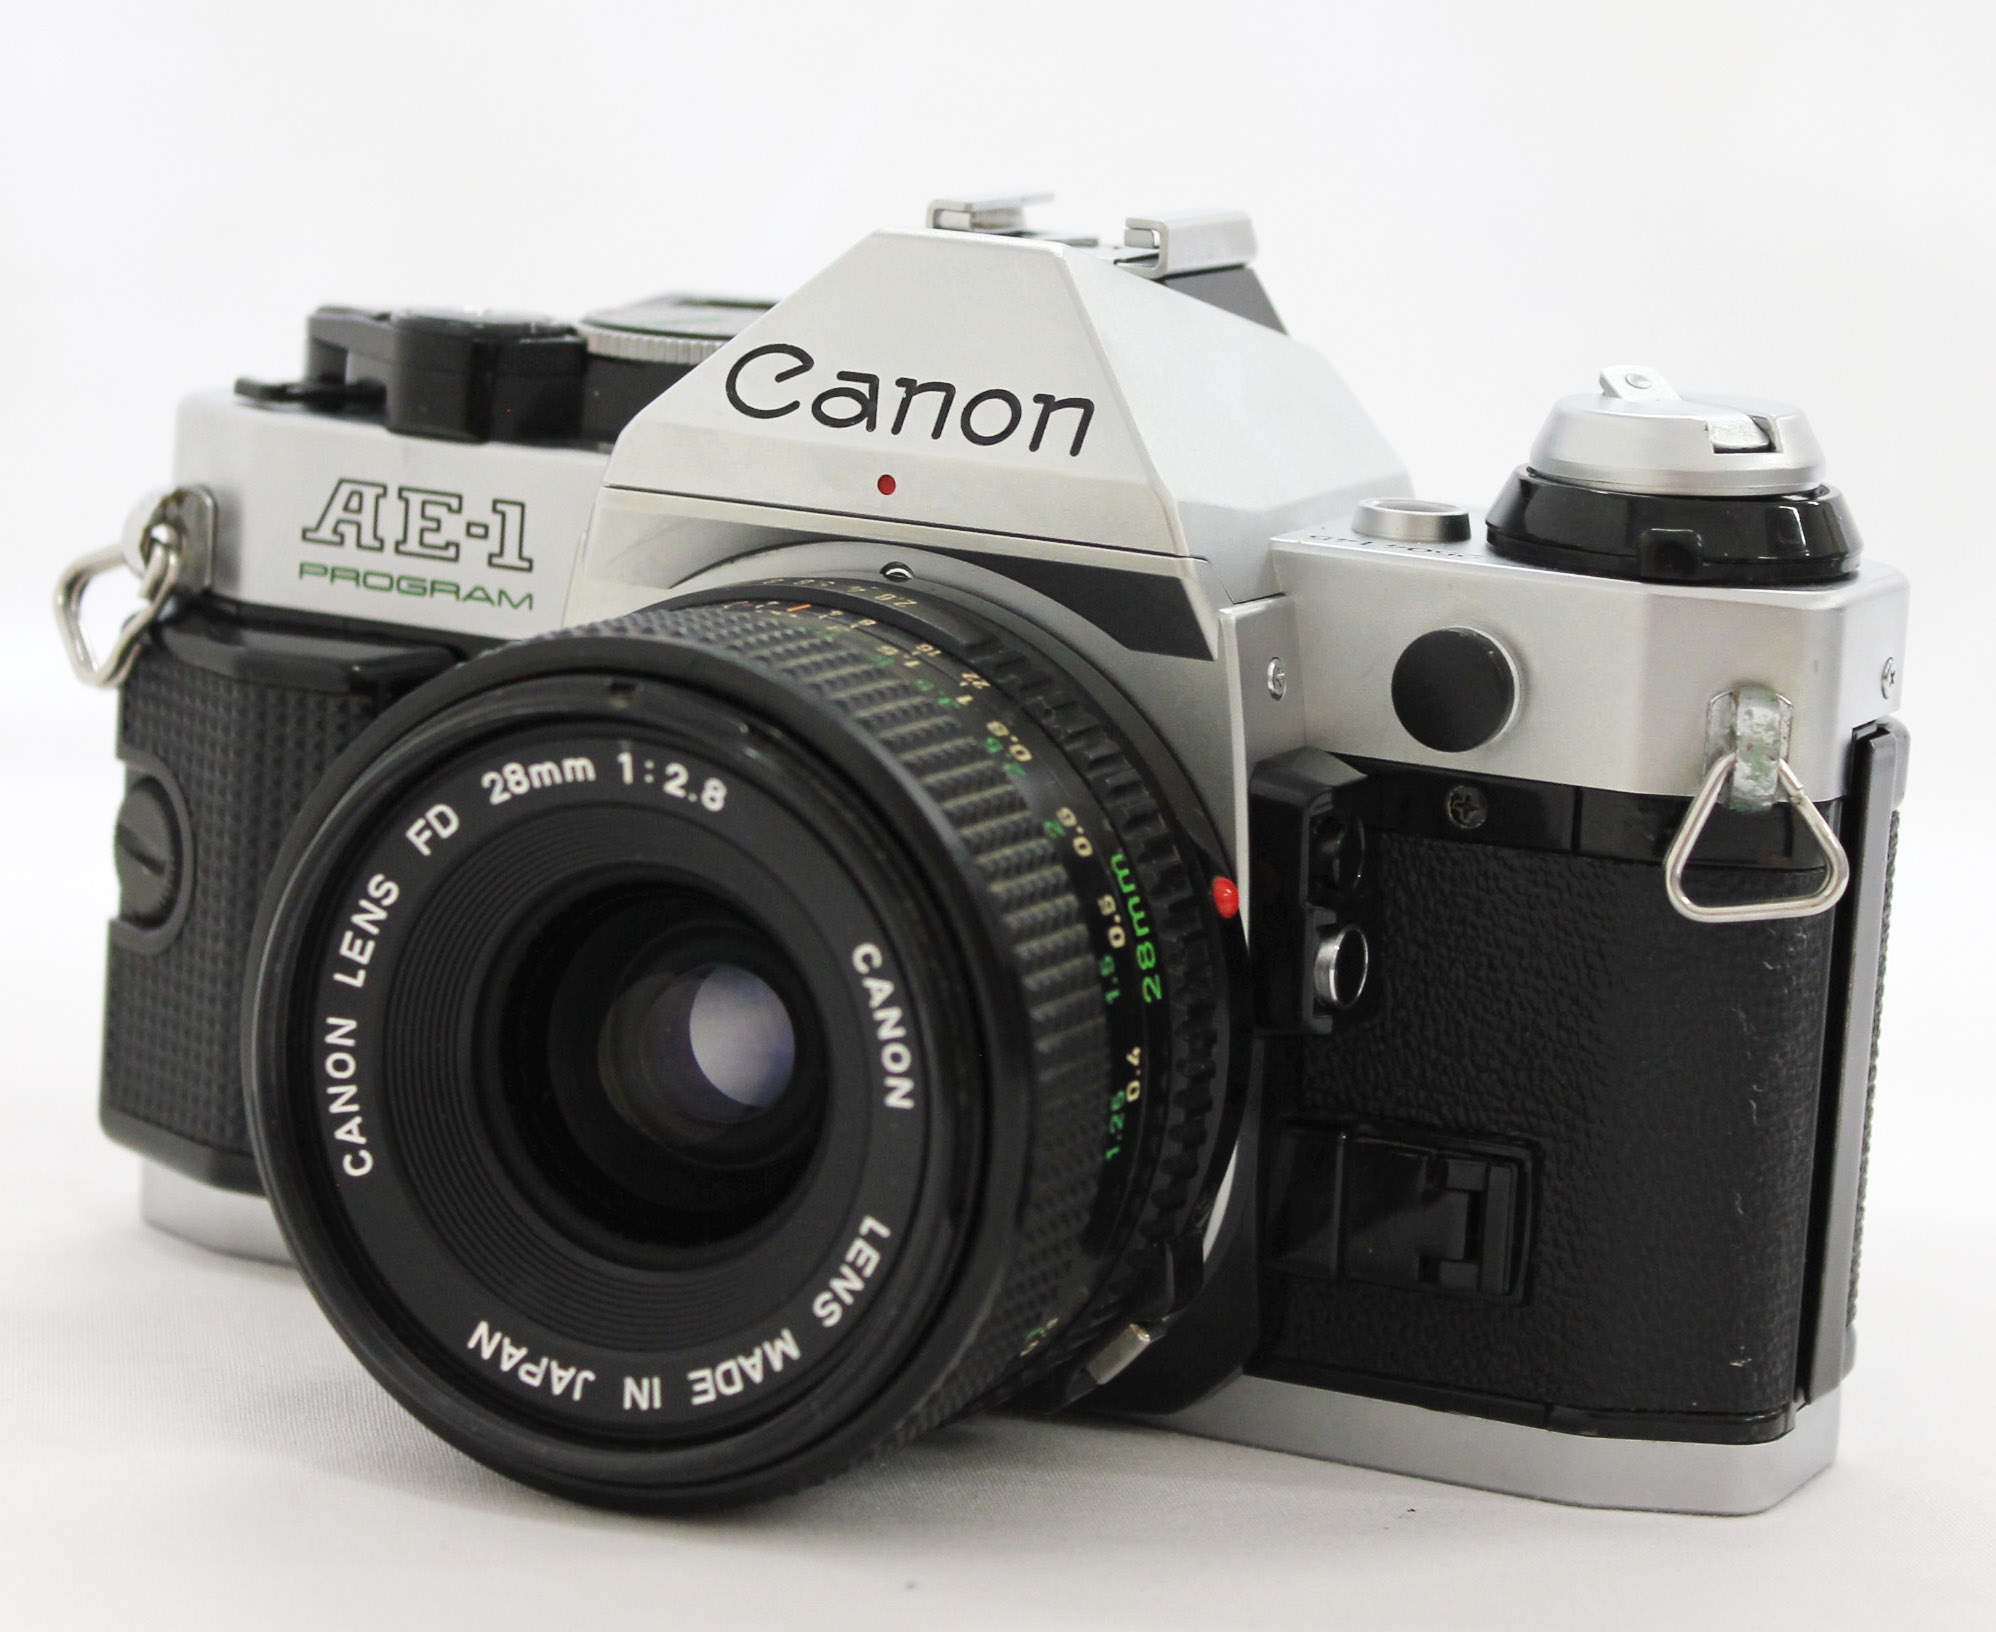 Japan Used Camera Shop | Canon AE-1 Program 35mm SLR Film Camera with New FD 28mm F/2.8 Lens from Japan